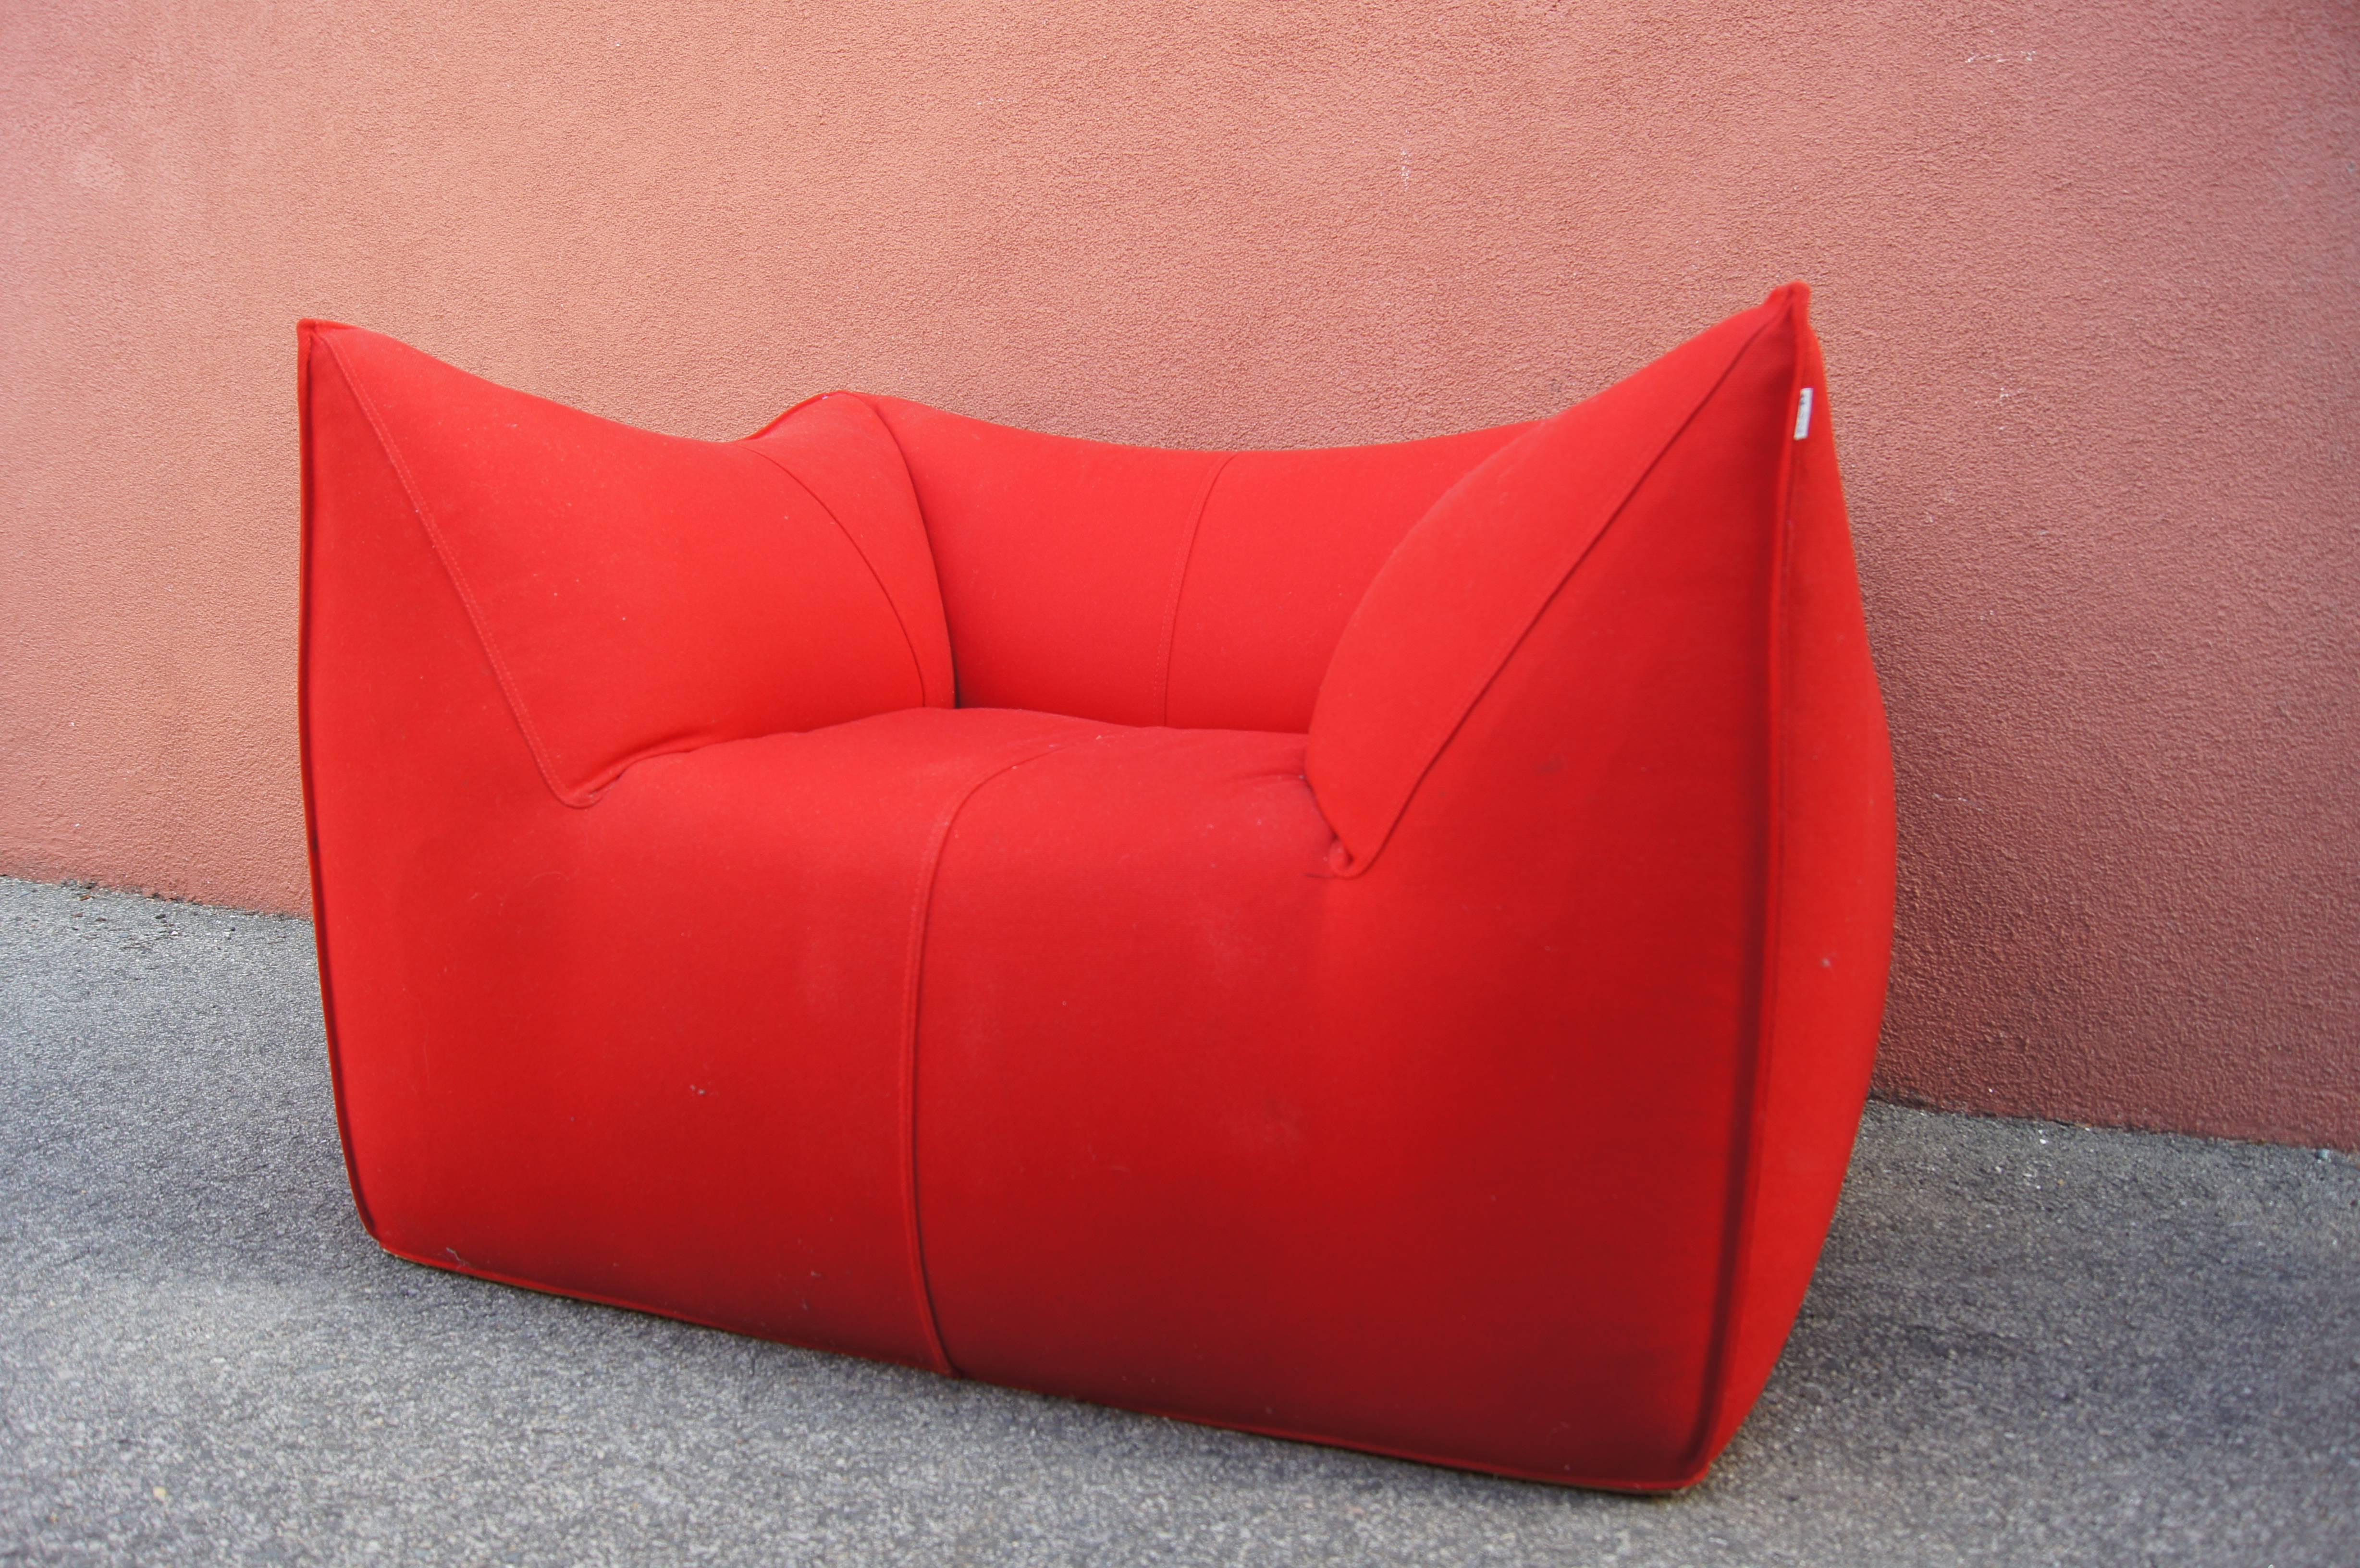 Mario Bellini designed Le Bambole for B&B Italia in 1972, armchairs and sofas shaped in their entirety like large cushions. Combining extraordinary comfort and style, this Bambola lounge chair is upholstered in a vibrant red wool, which unzips for